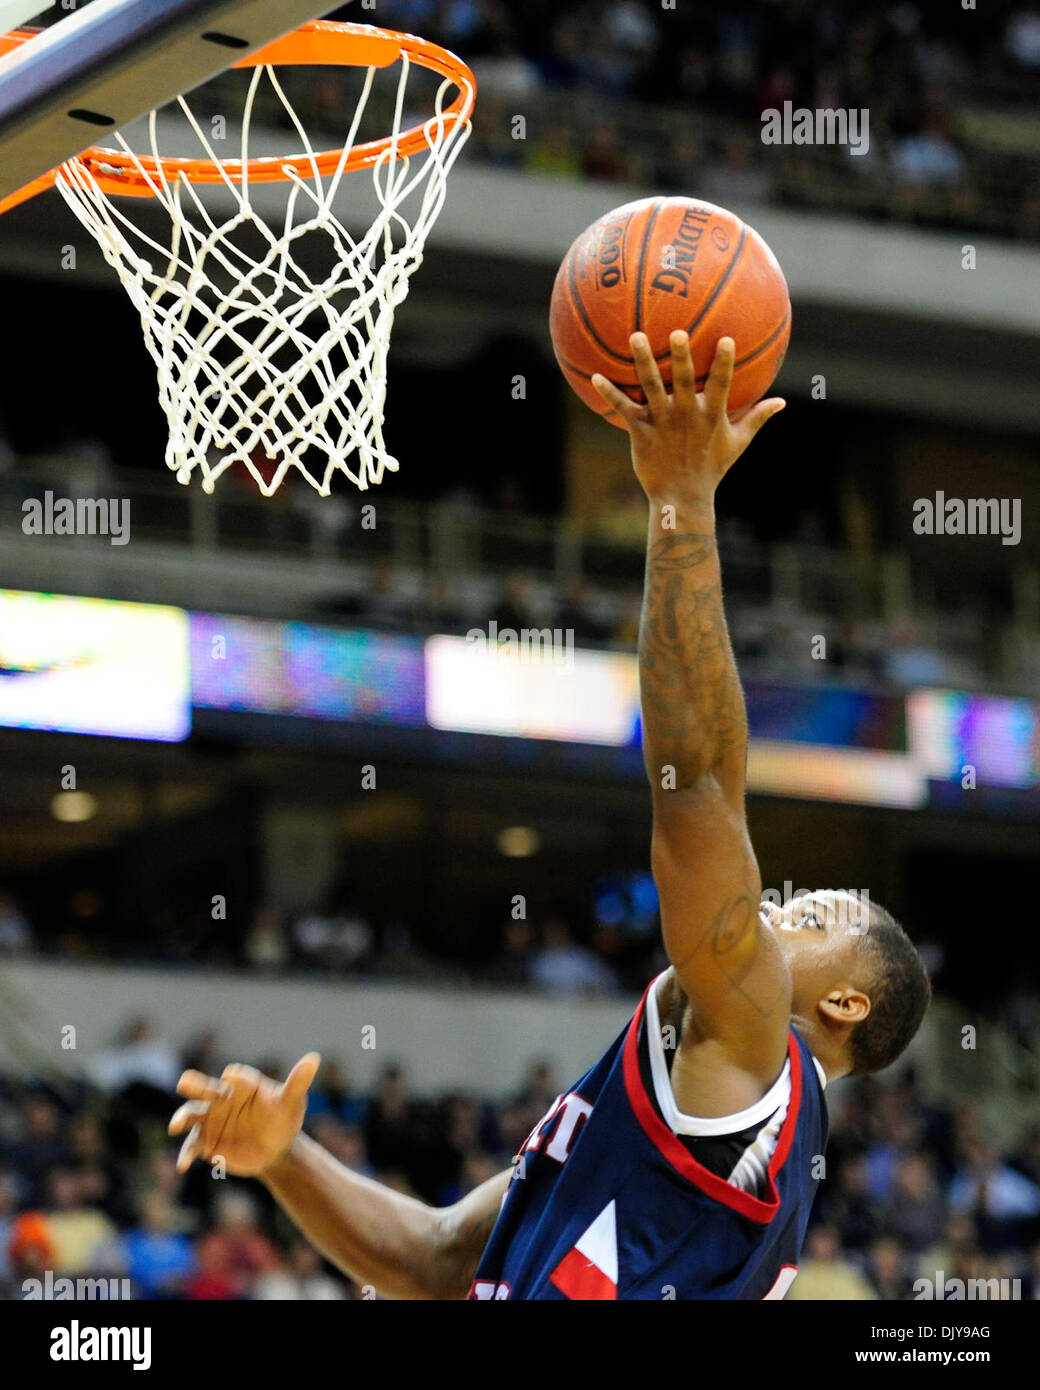 Nov. 23, 2010 - Pittsburgh, Pennsylvania, United States of America - 23 November 2010: Robert Morris G Velton Jones (#2)drives to the hoop for an easy lay up against the Pittsburgh Panthers in 2nd half action at the Petersen Events Center in Pittsburgh Pennsylvania. Pittsburgh defeats Robert Morris 74-53. (Credit Image: © Paul Lindenfelser/Southcreek Global/ZUMAPRESS.com) Stock Photo